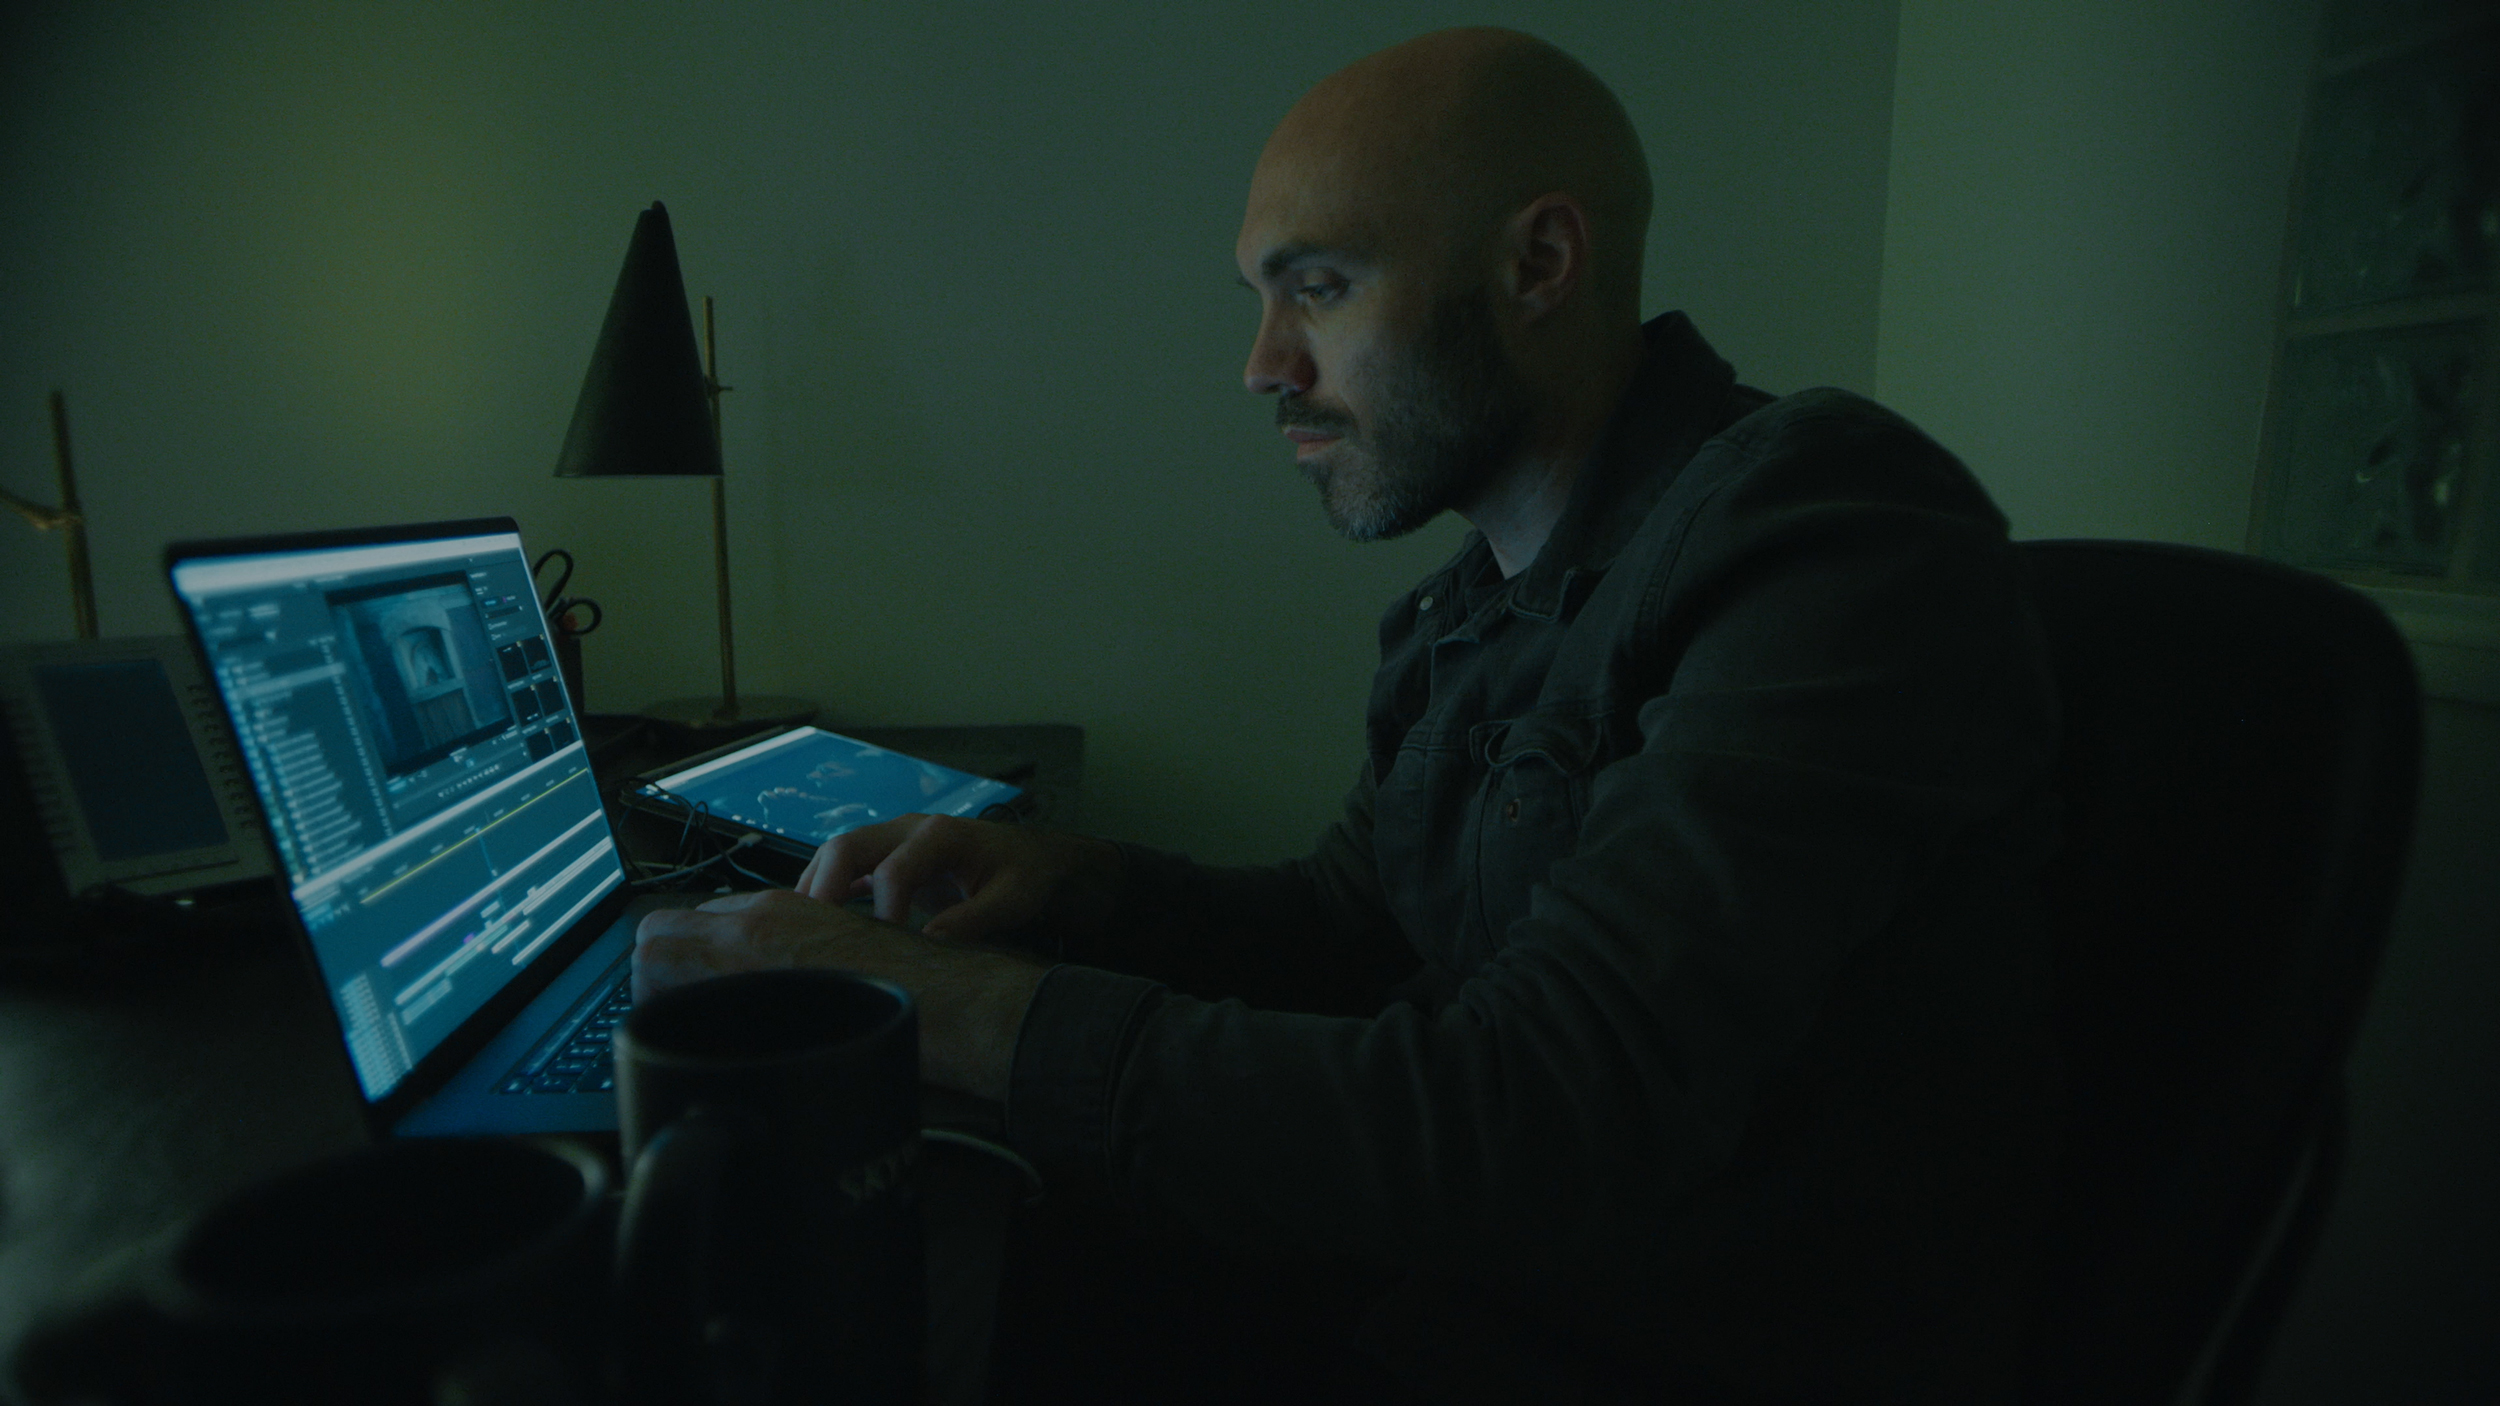 David Lowery working on "Green Knight" with Premiere Pro and Frame.io